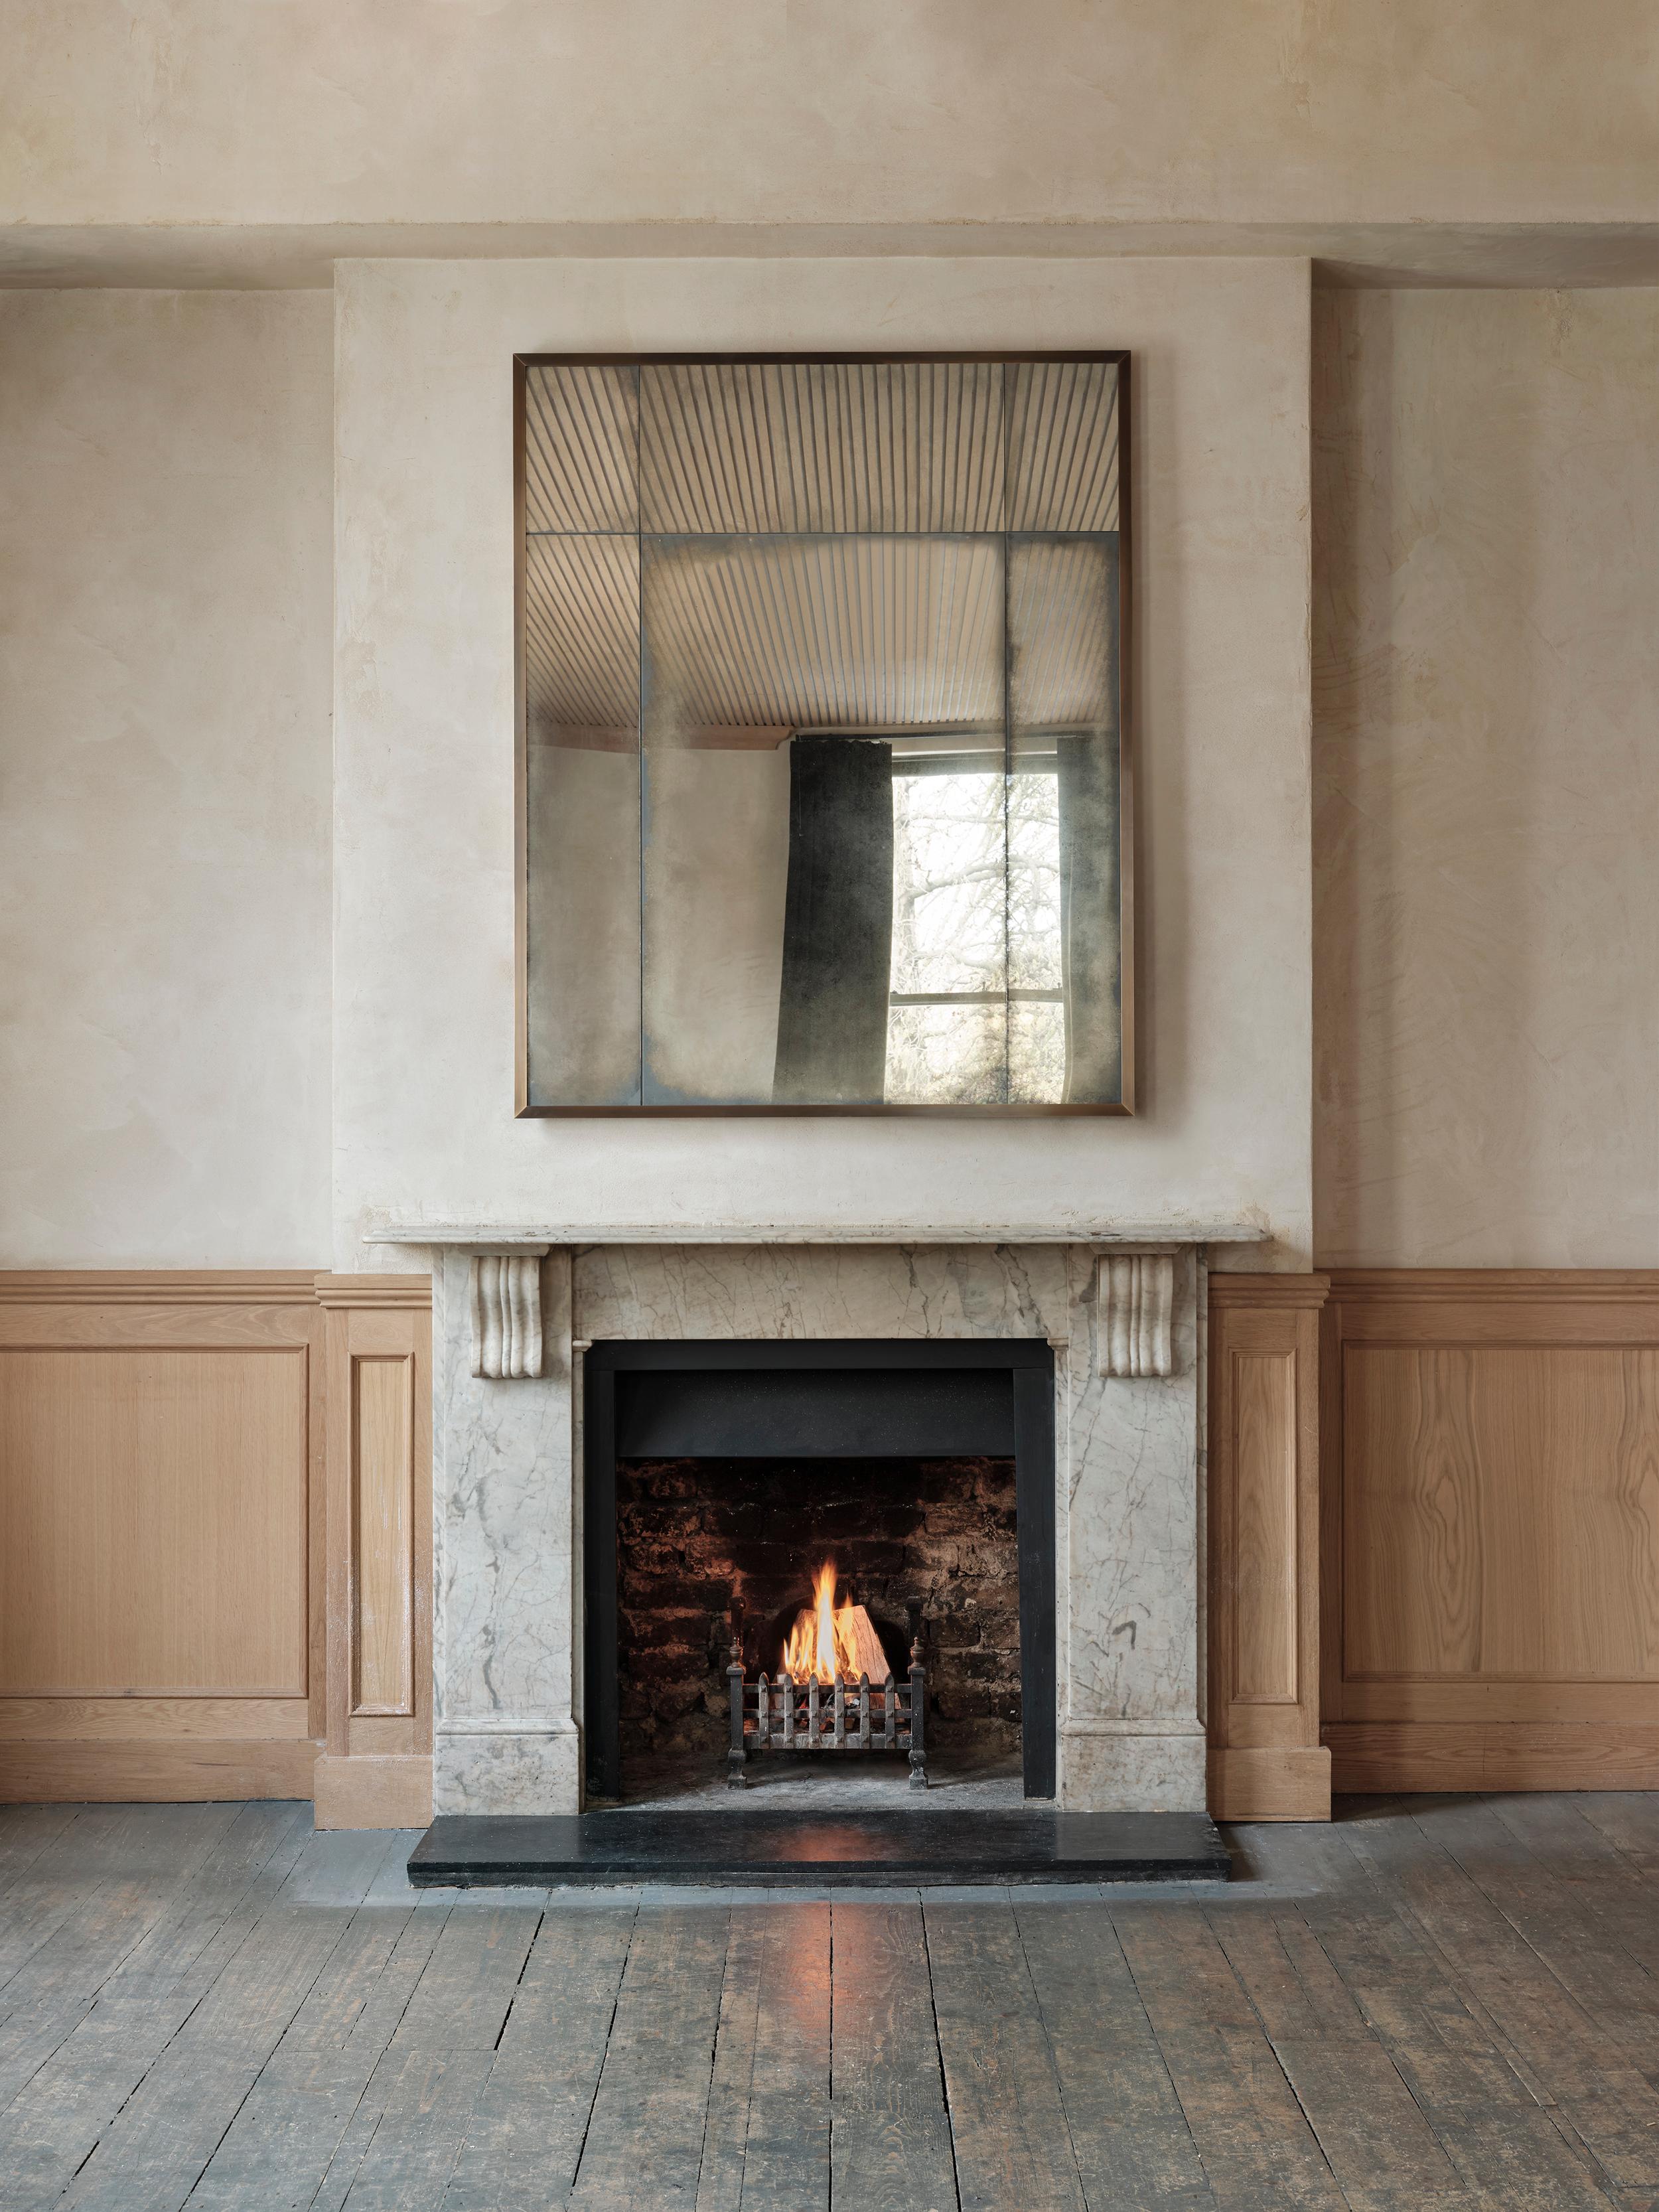 A signature piece for Rupert Bevan, our elegant Art Deco overmantel mirror features a patinated brass angle frame with lightly antiqued mirror glass panels.  

Handcrafted in our Shropshire workshops and available to view in our London showroom.